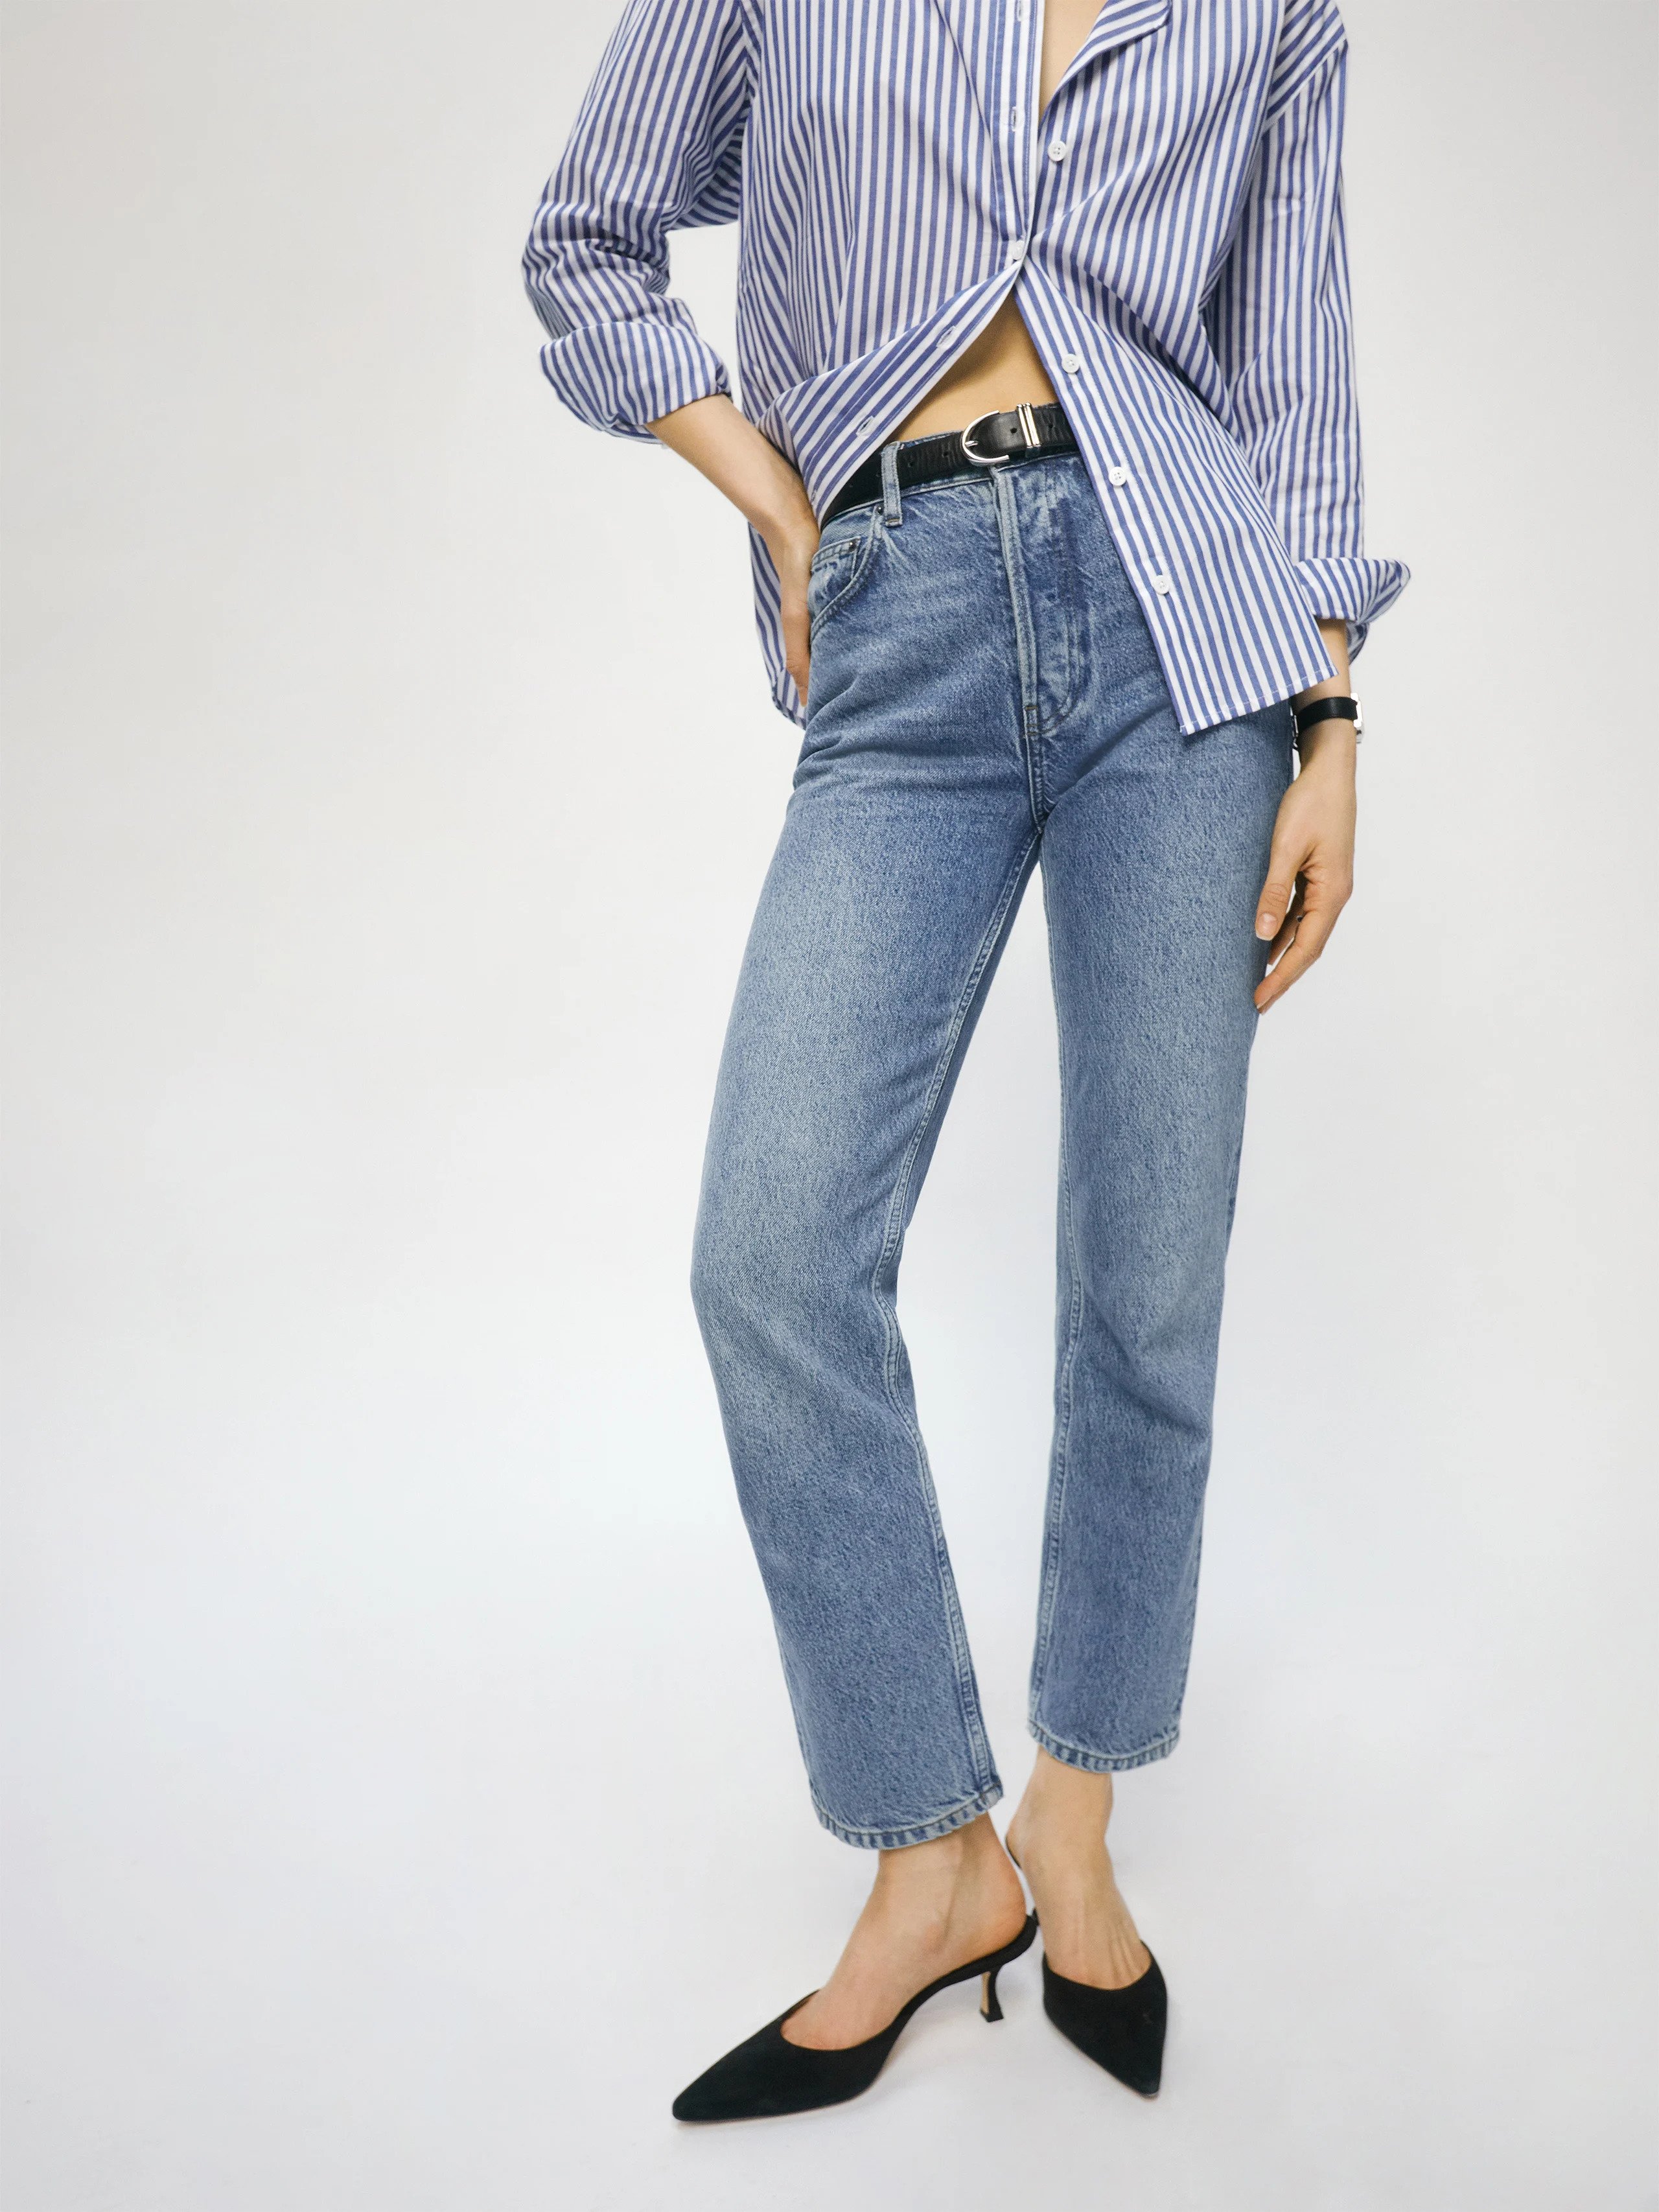 8 Stylish Bodysuit-and-Jeans Outfits We're Loving Right Now | Who What ...